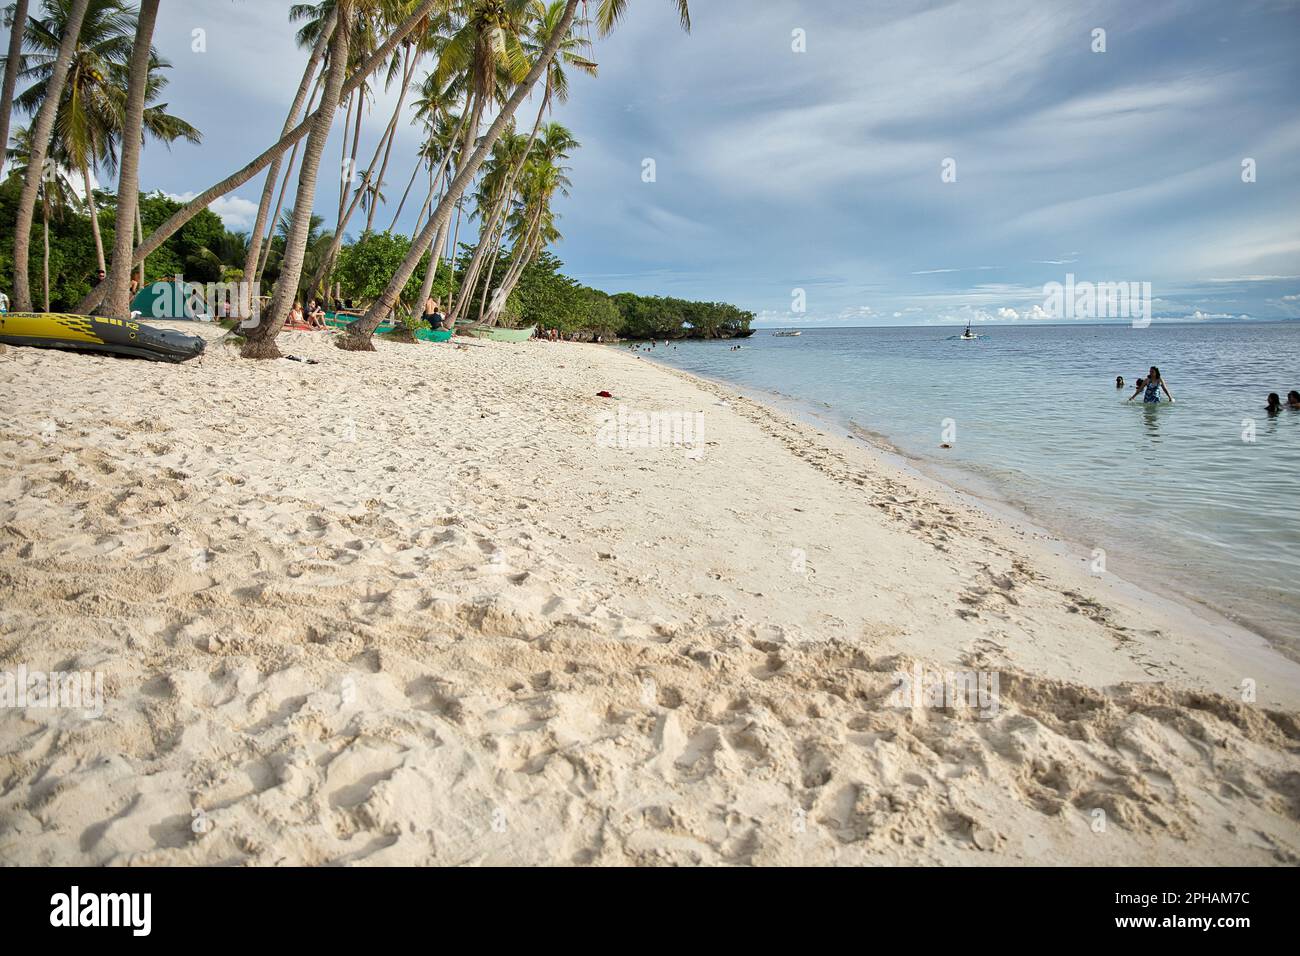 Dreamlike idyllic beach of Siquijor in the Philippines with palm trees along the beach. Stock Photo